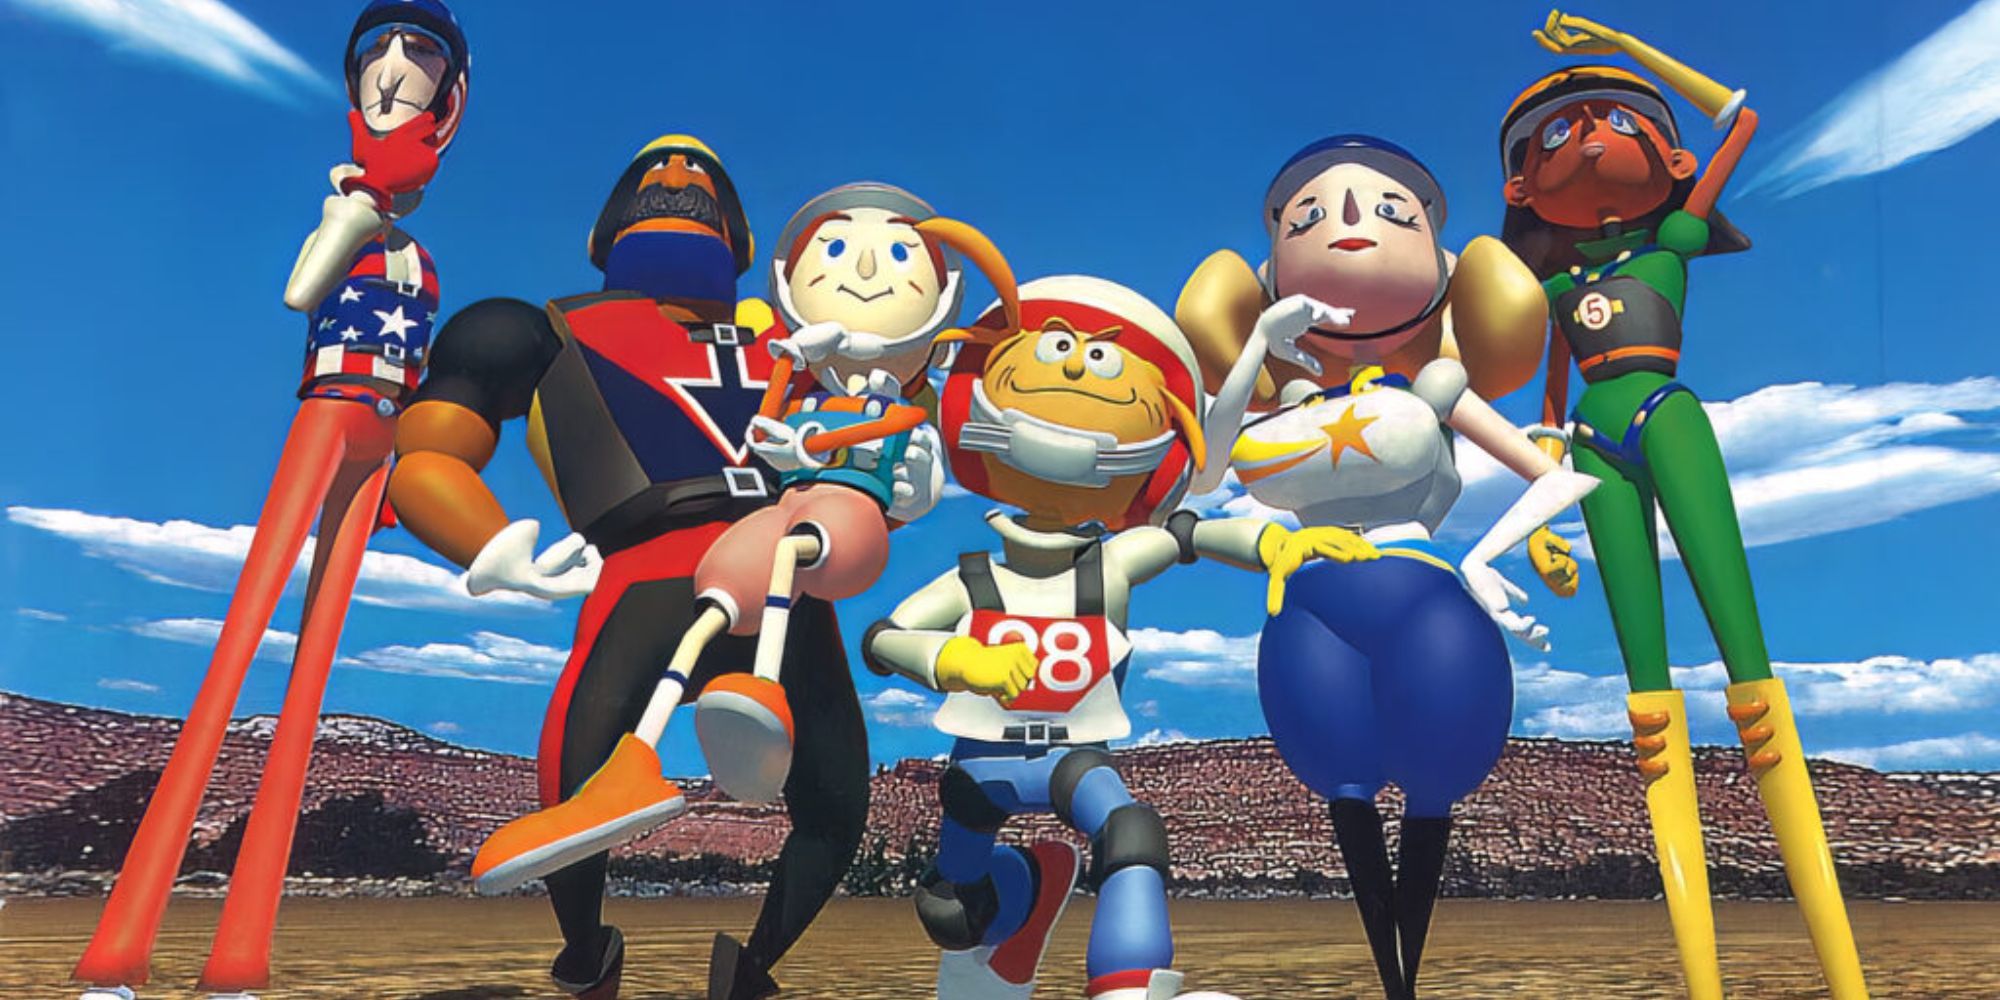 The crew from Pilotwings stands together under a blue sky